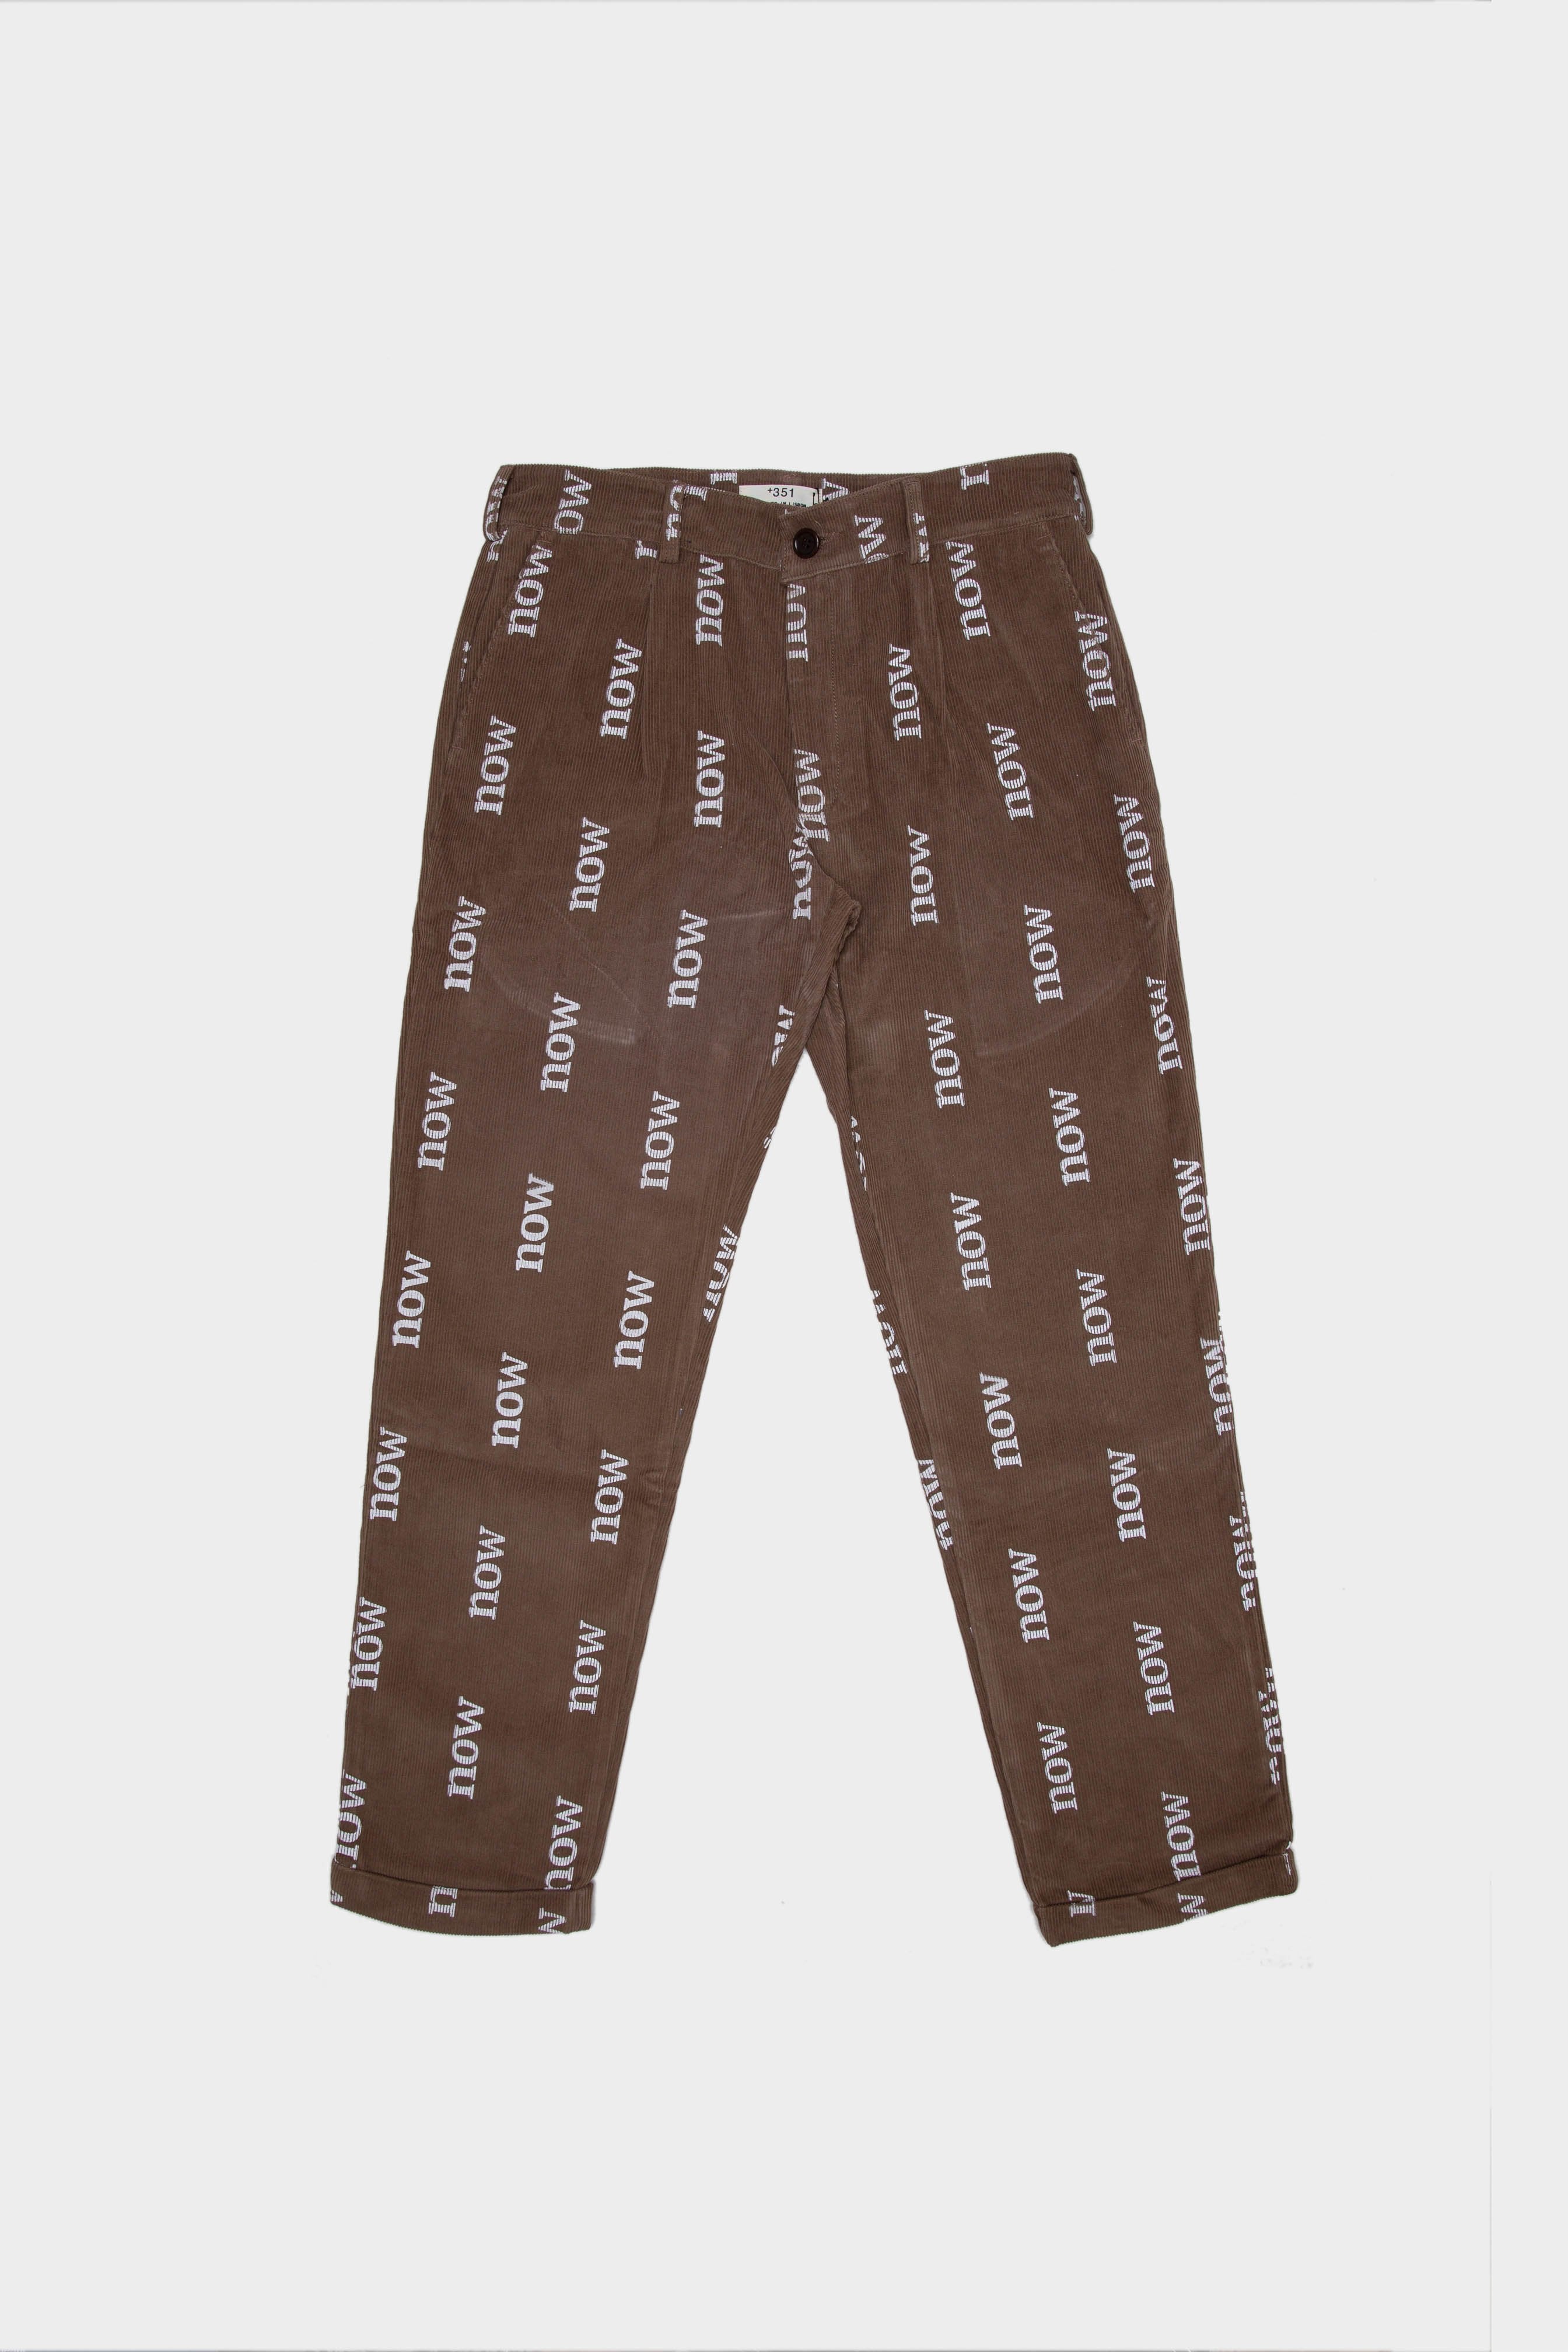 SPECIAL EDITION CORDUROY PANTS BROWN TABACCO